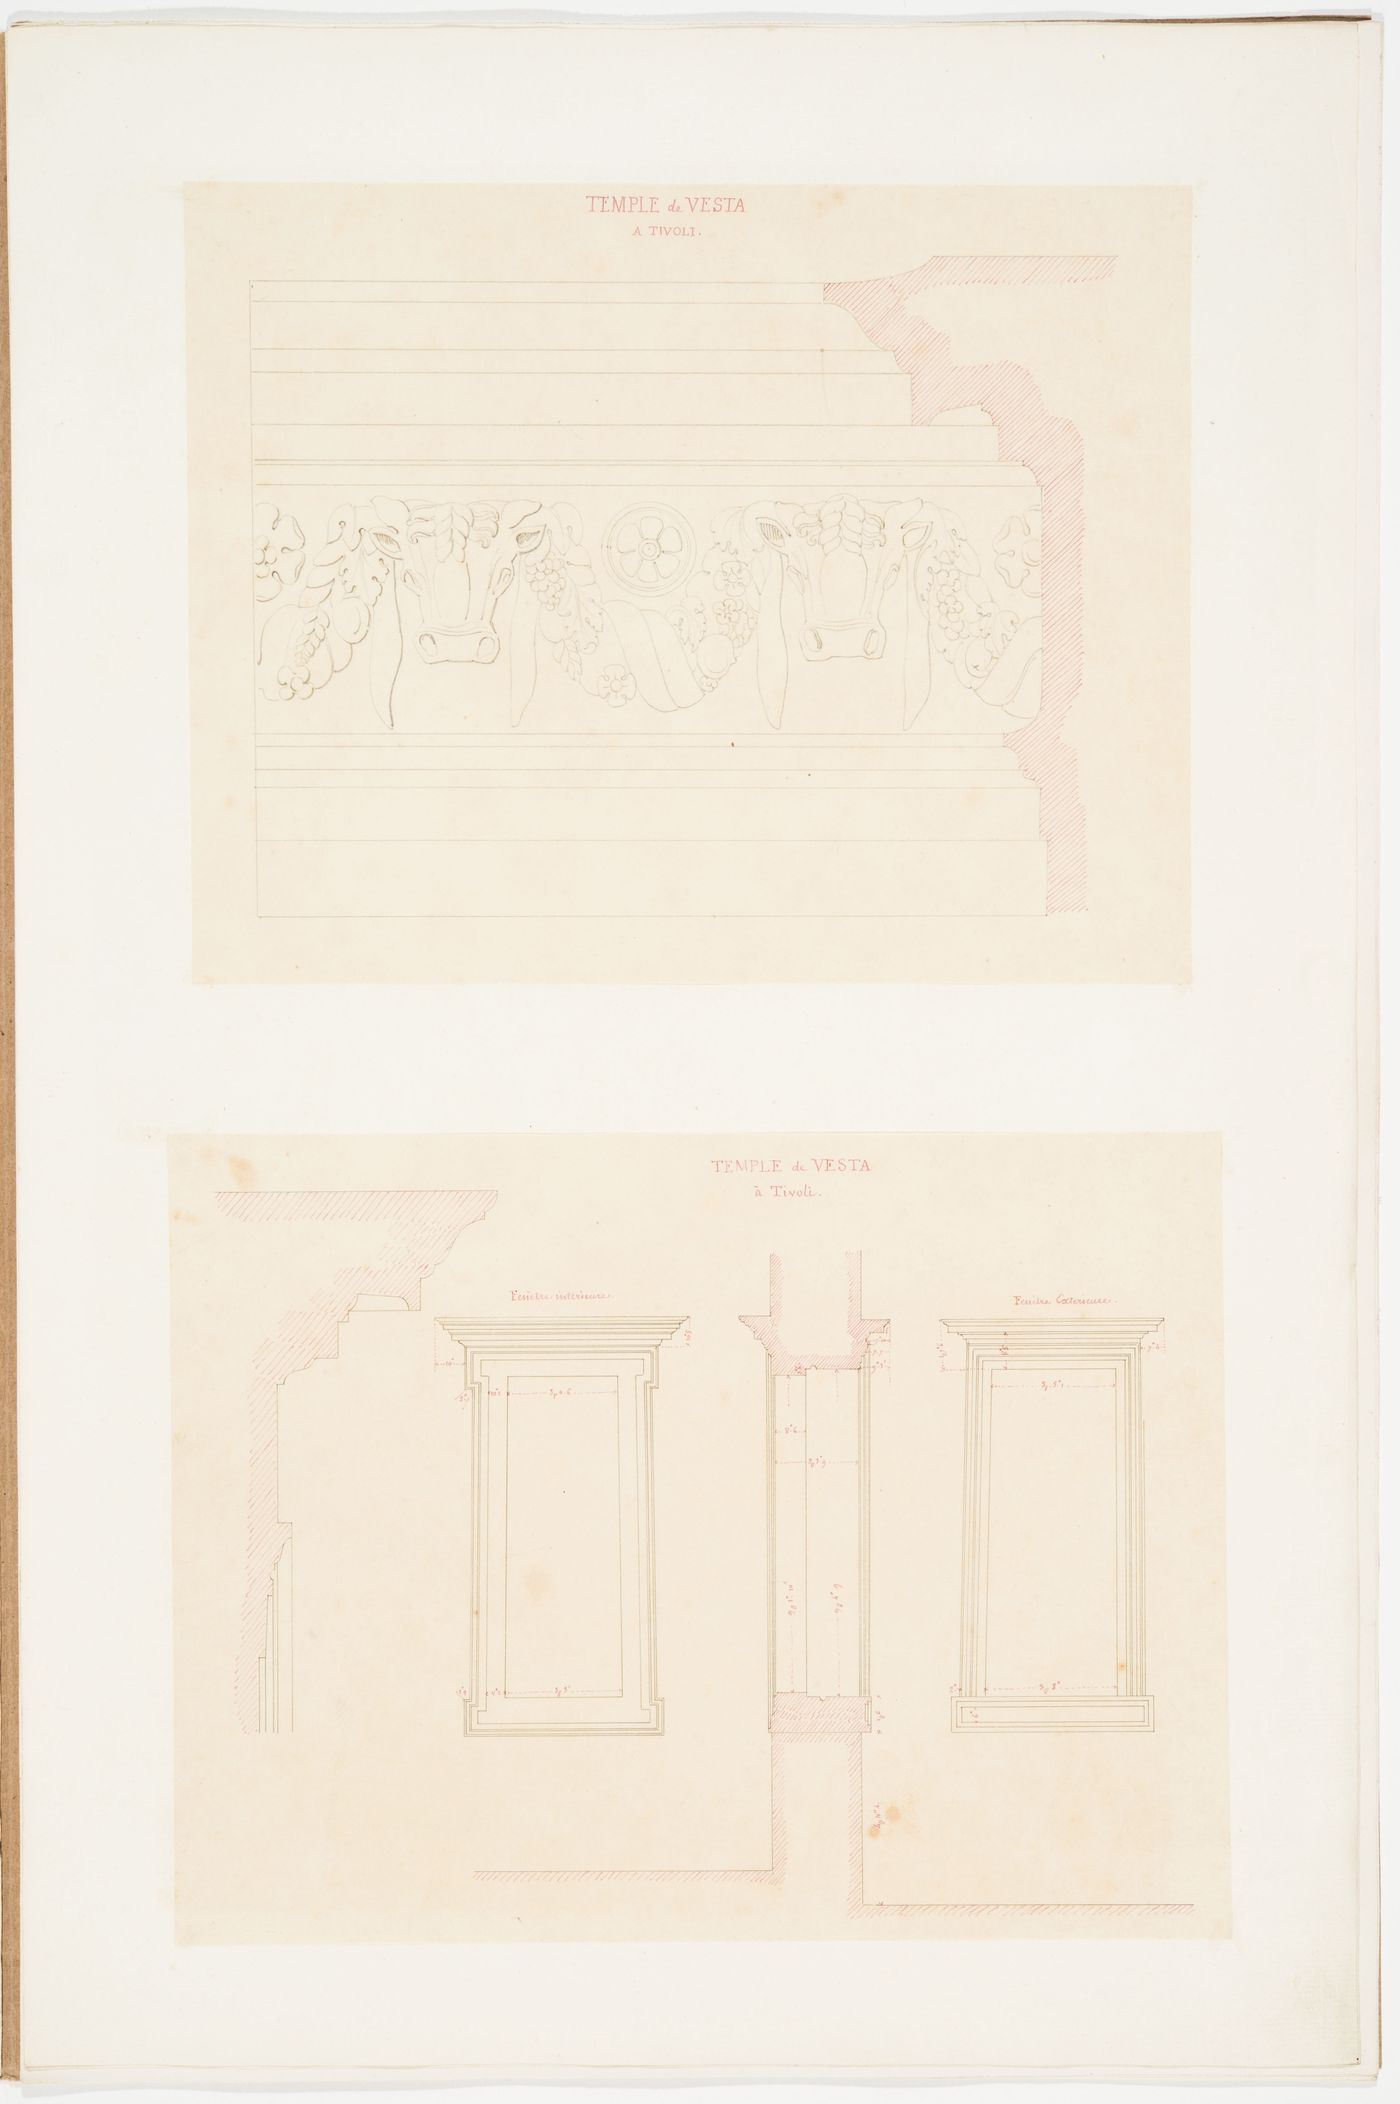 Elevation and profile of a frieze showing bucrania and festoons from the Temple of the Sibyl, Tivoli; Two elevations, sections, and profiles of the interior and exterior window from the Temple of the Sibyl, Tivoli